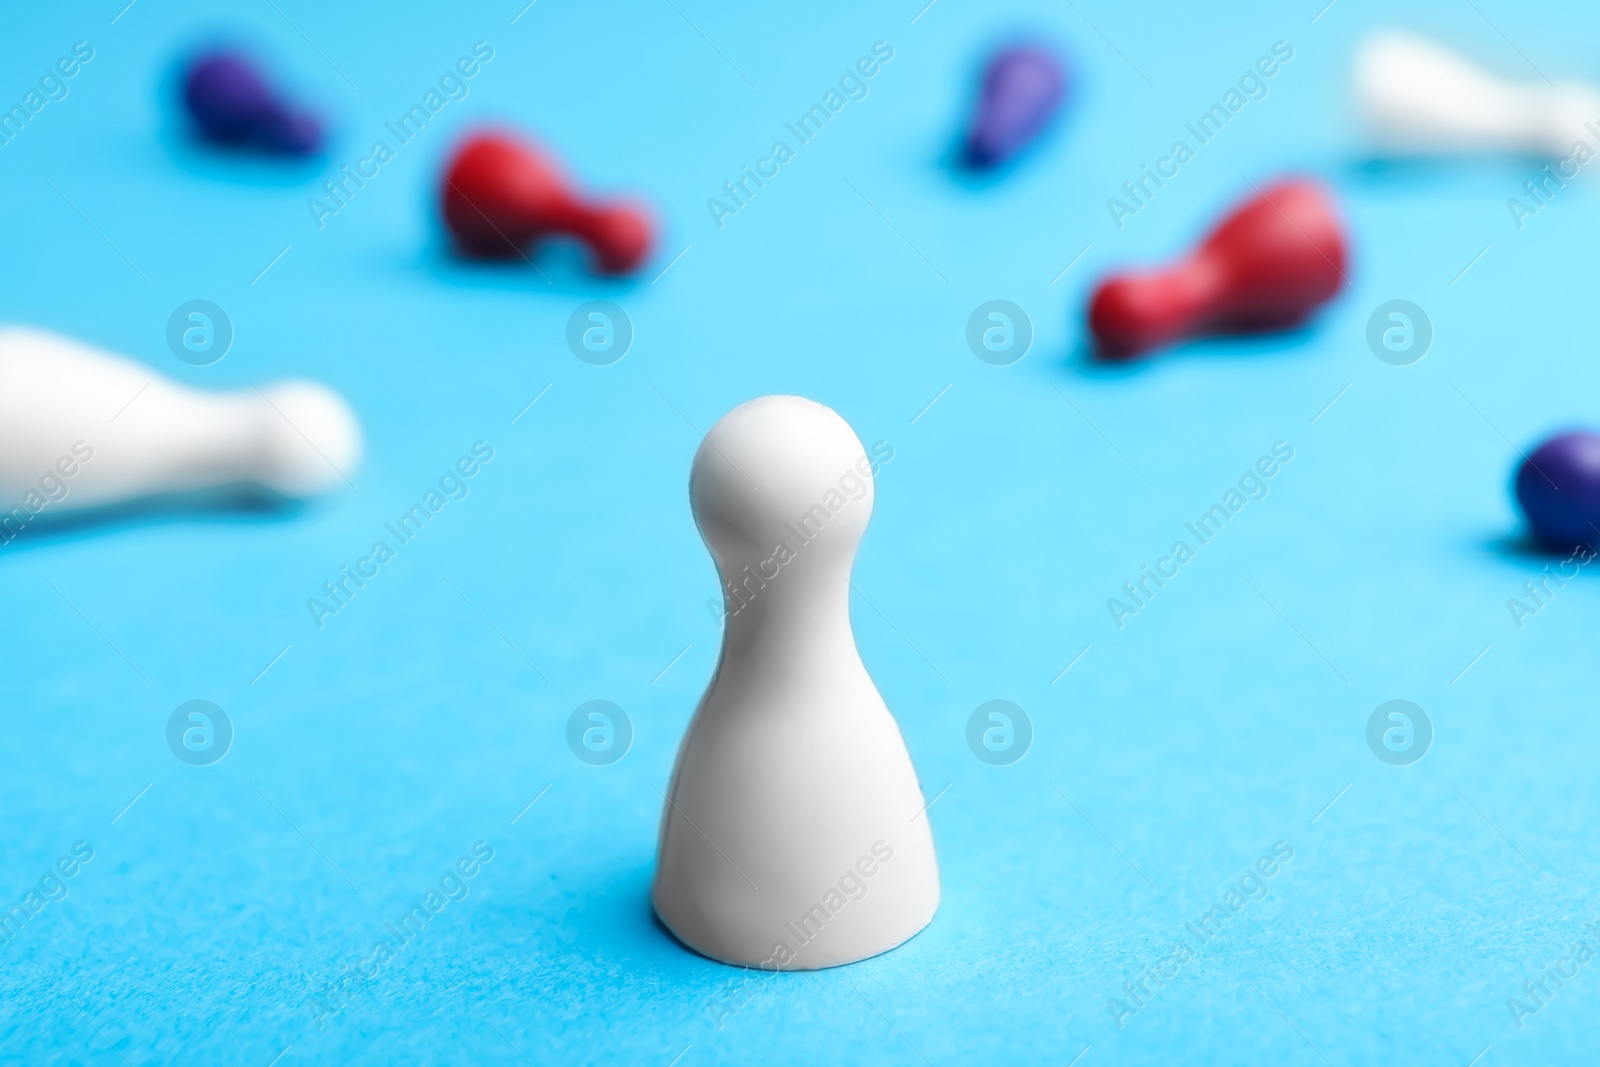 Photo of White pawn standing alone and other fallen down on table. Victory concept